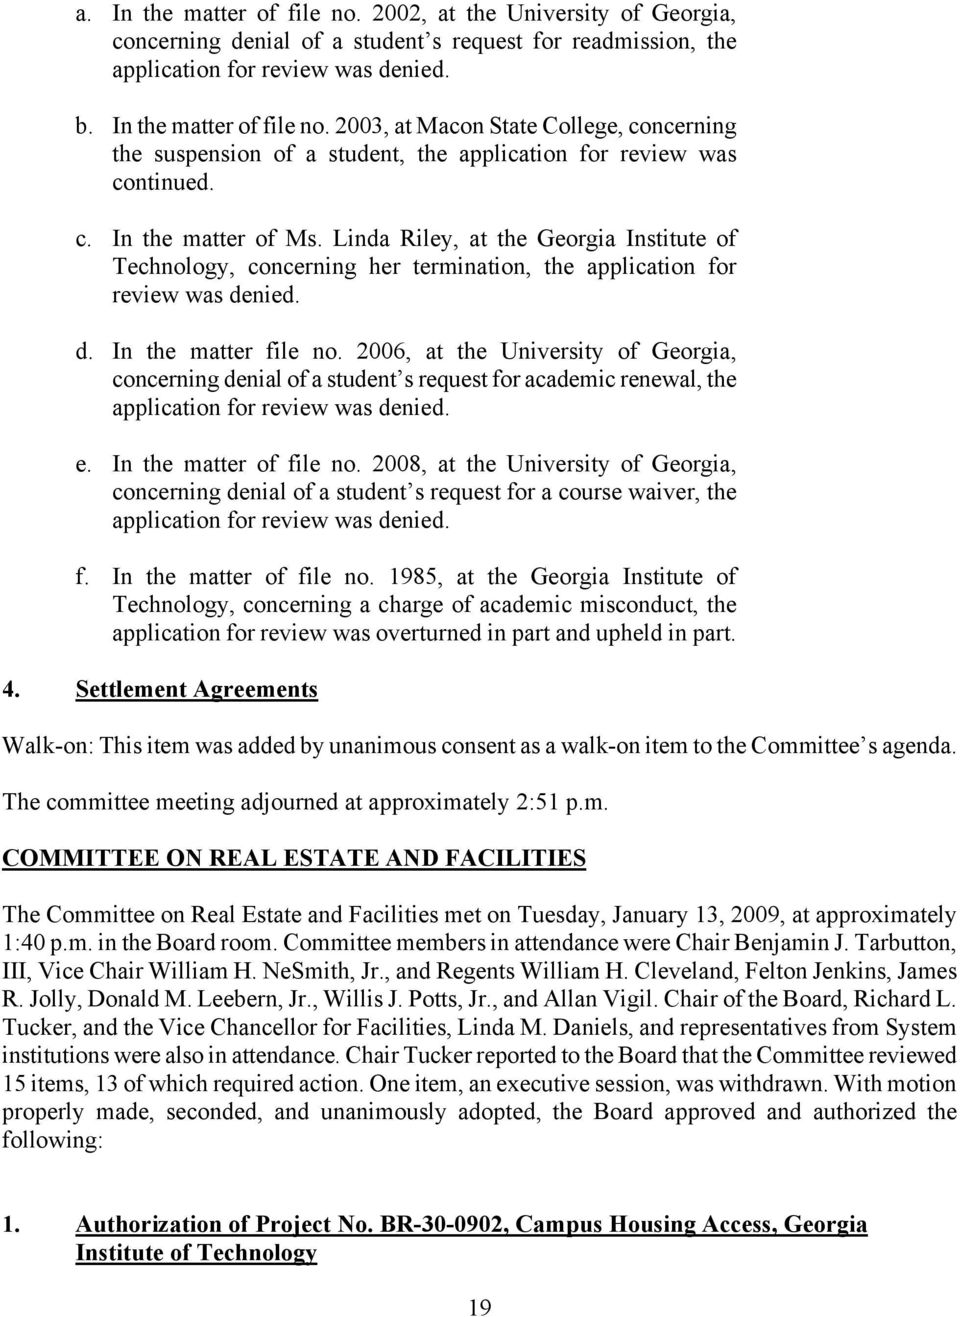 2006, at the University of Georgia, concerning denial of a student s request for academic renewal, the application for review was denied. e. In the matter of file no.